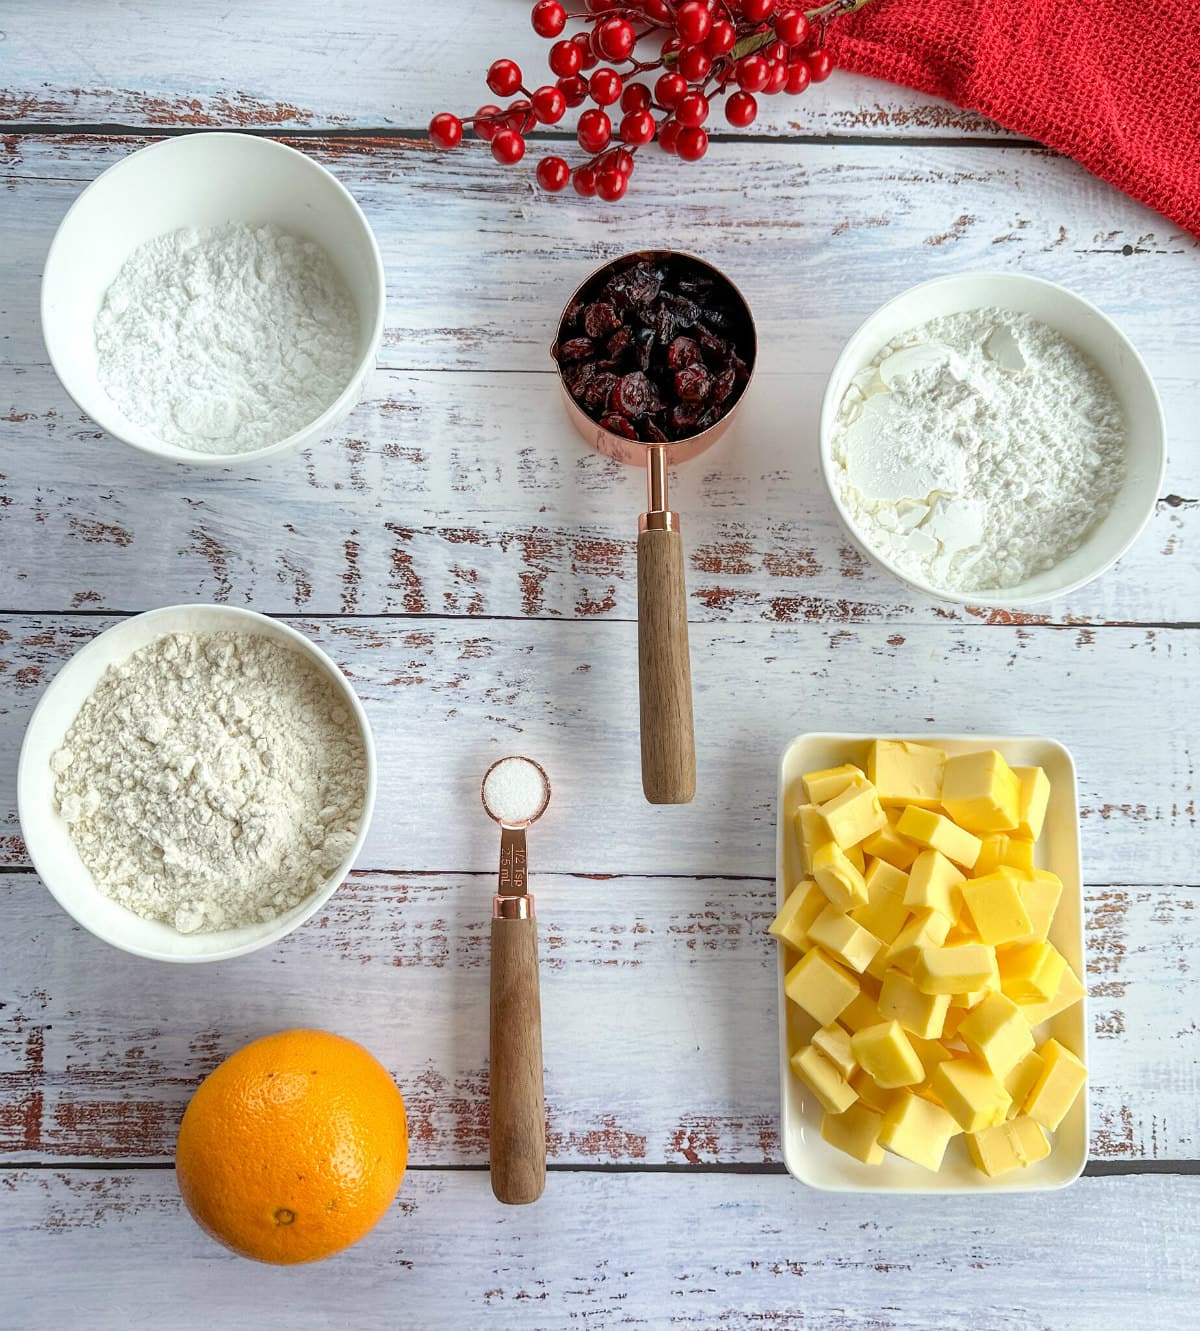 Ingredients for making orange and cranberry shortbread